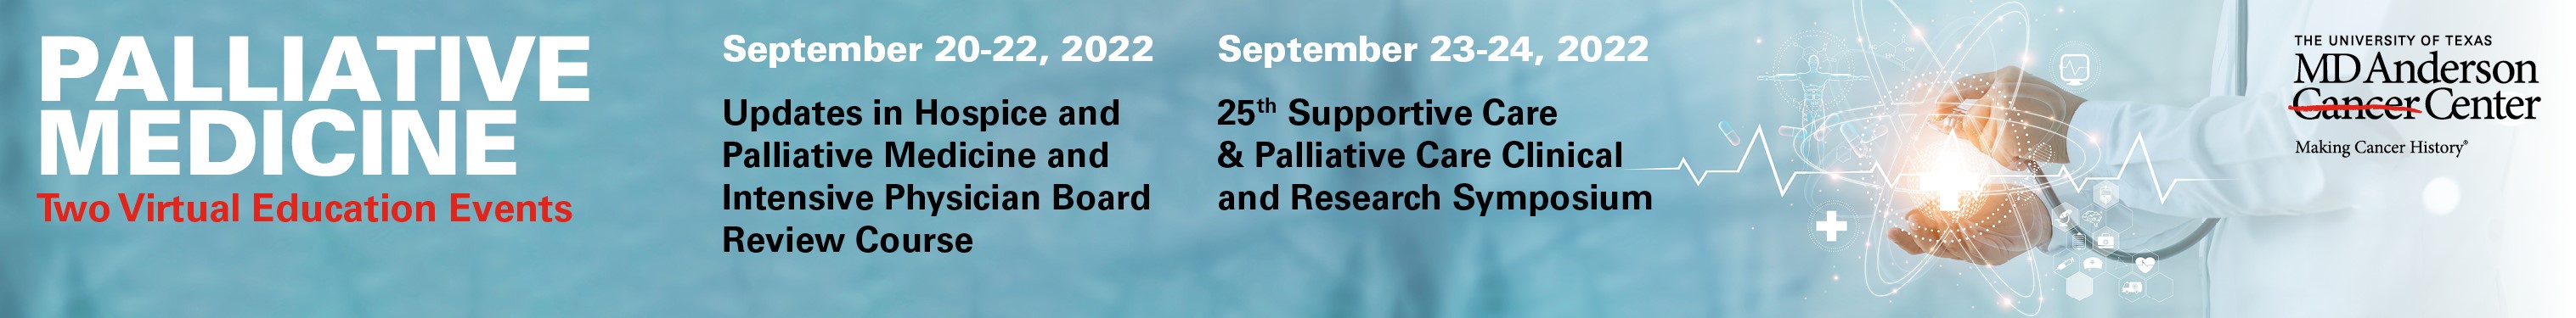 Updates in Hospice and Palliative Medicine and Intensive Physician Board Review Course 2022 Banner